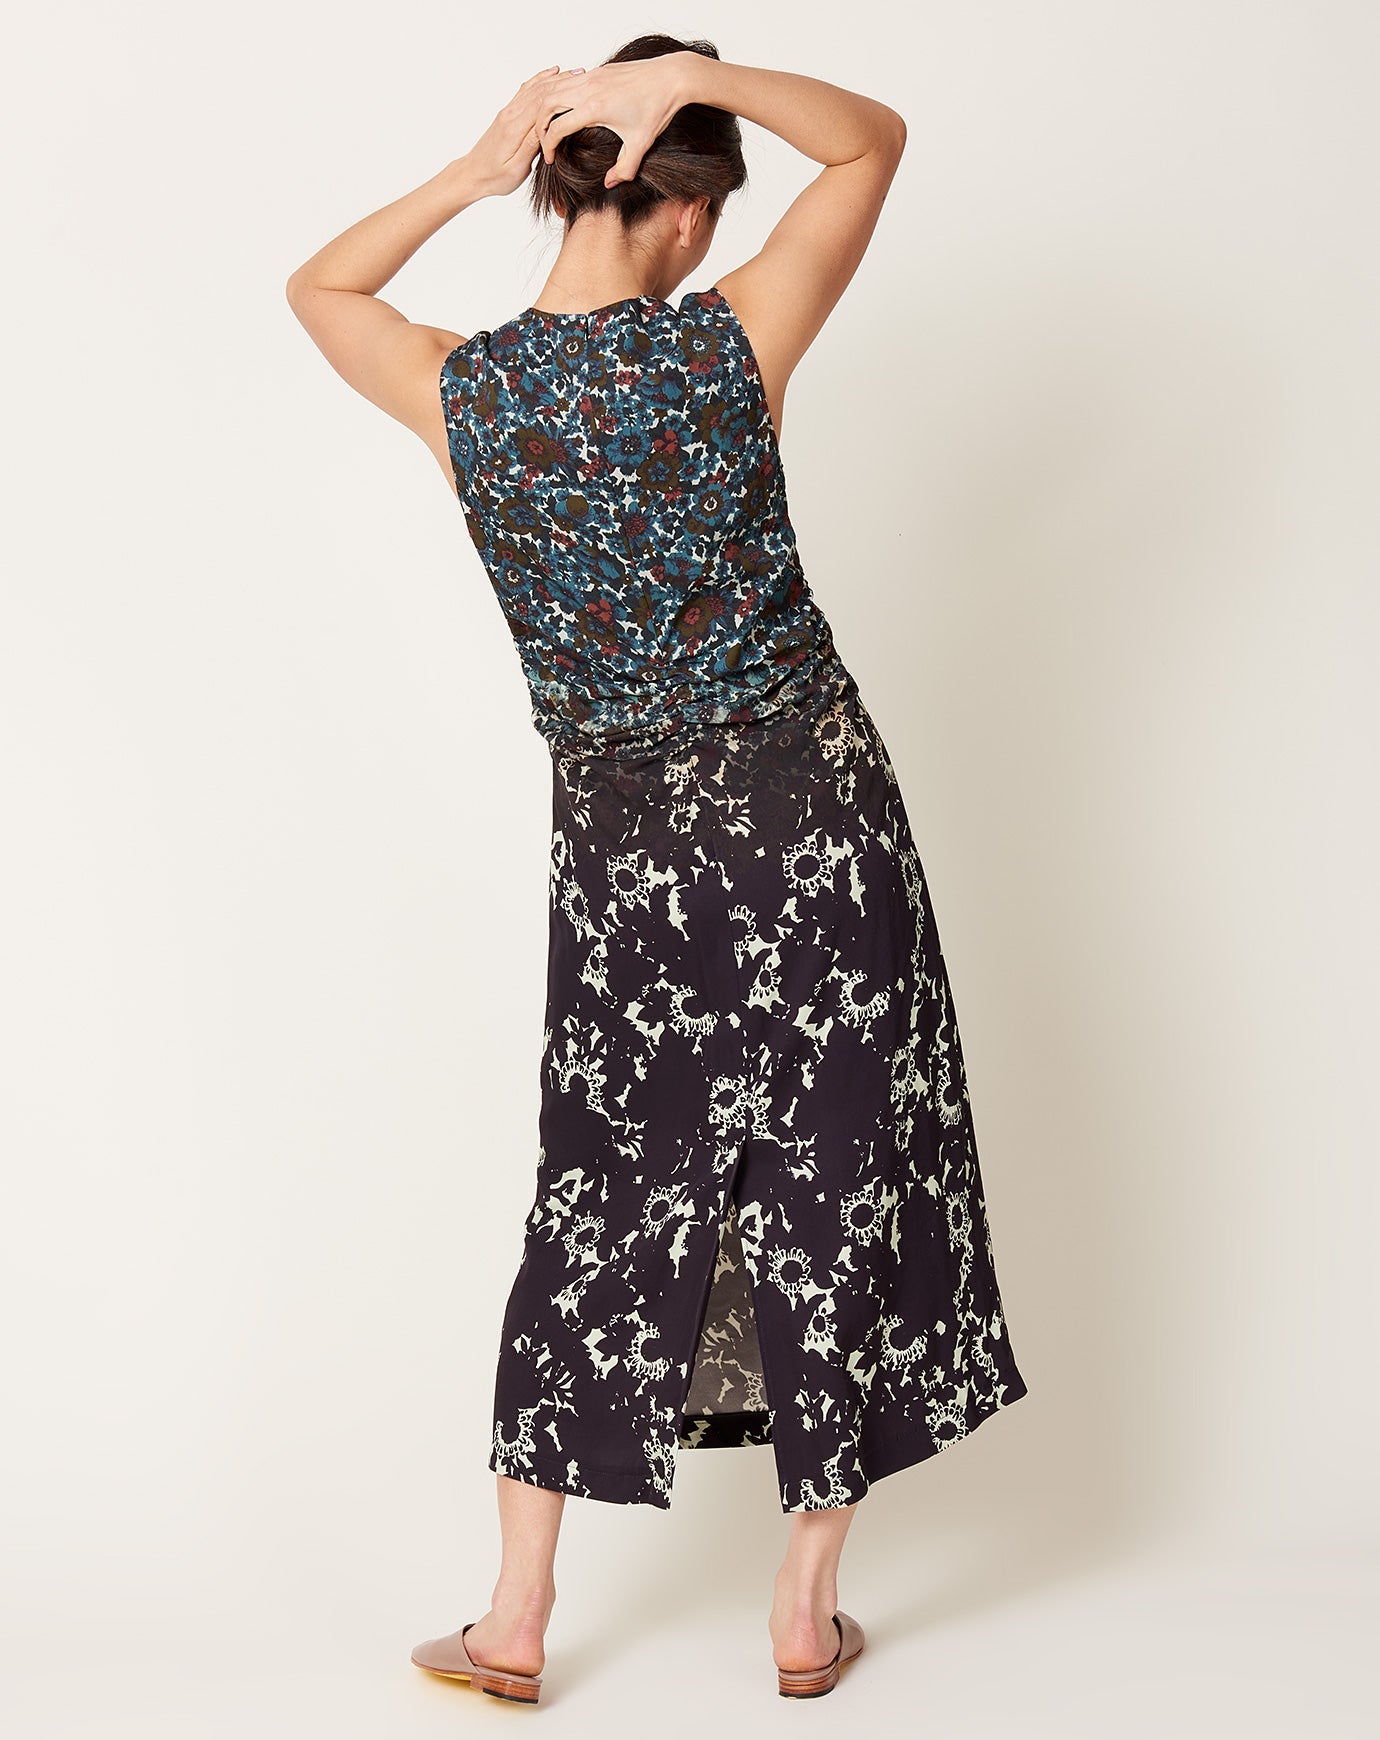 Rachel Comey Tousey Dress in Turquoise Floral Twill